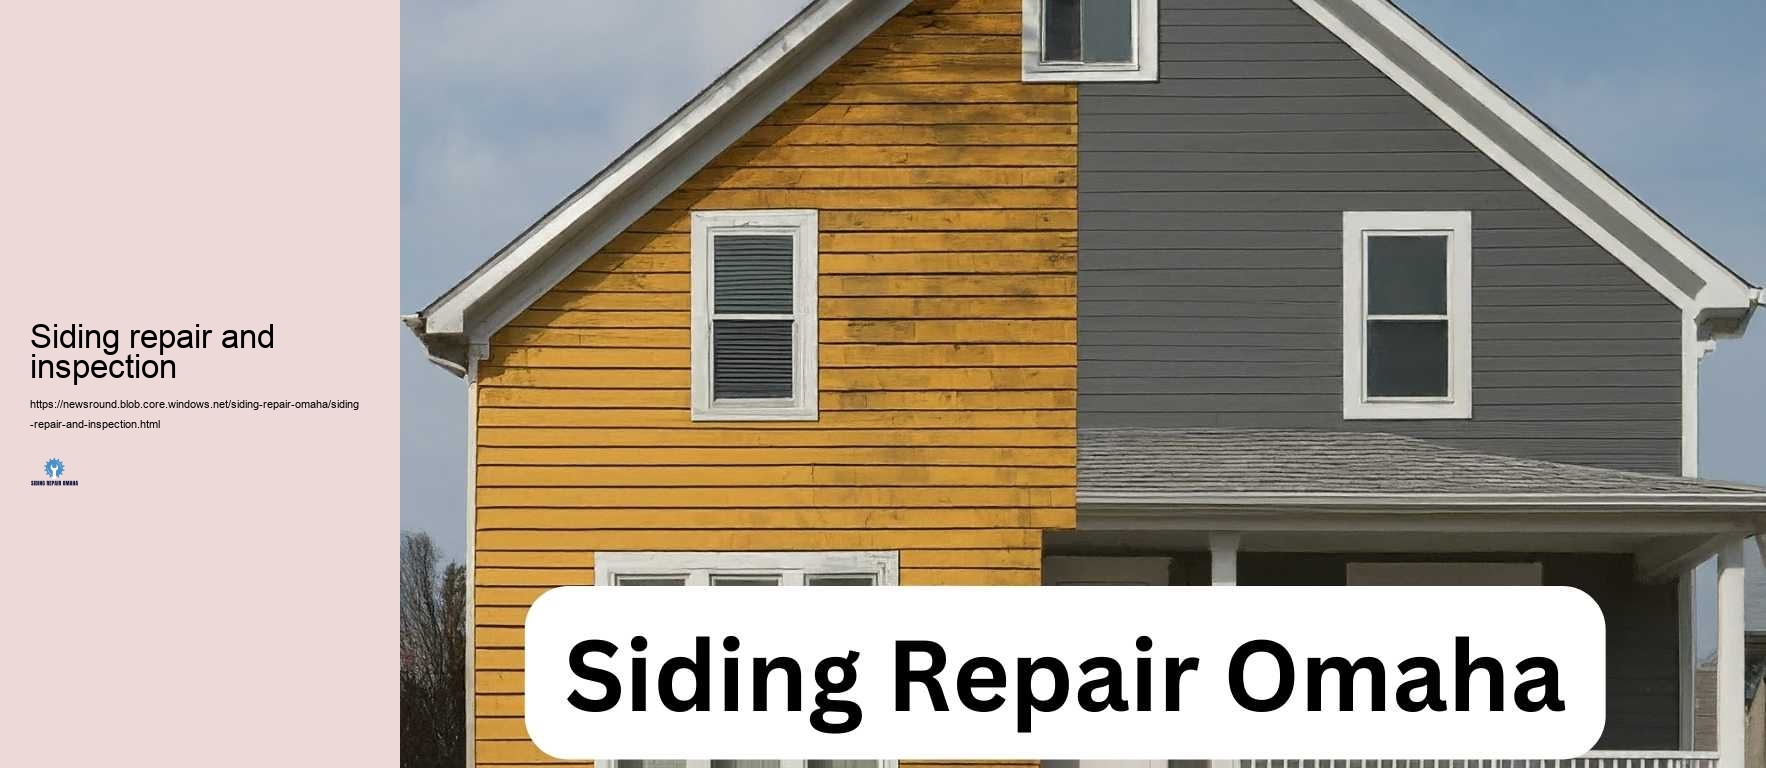 Siding repair and inspection